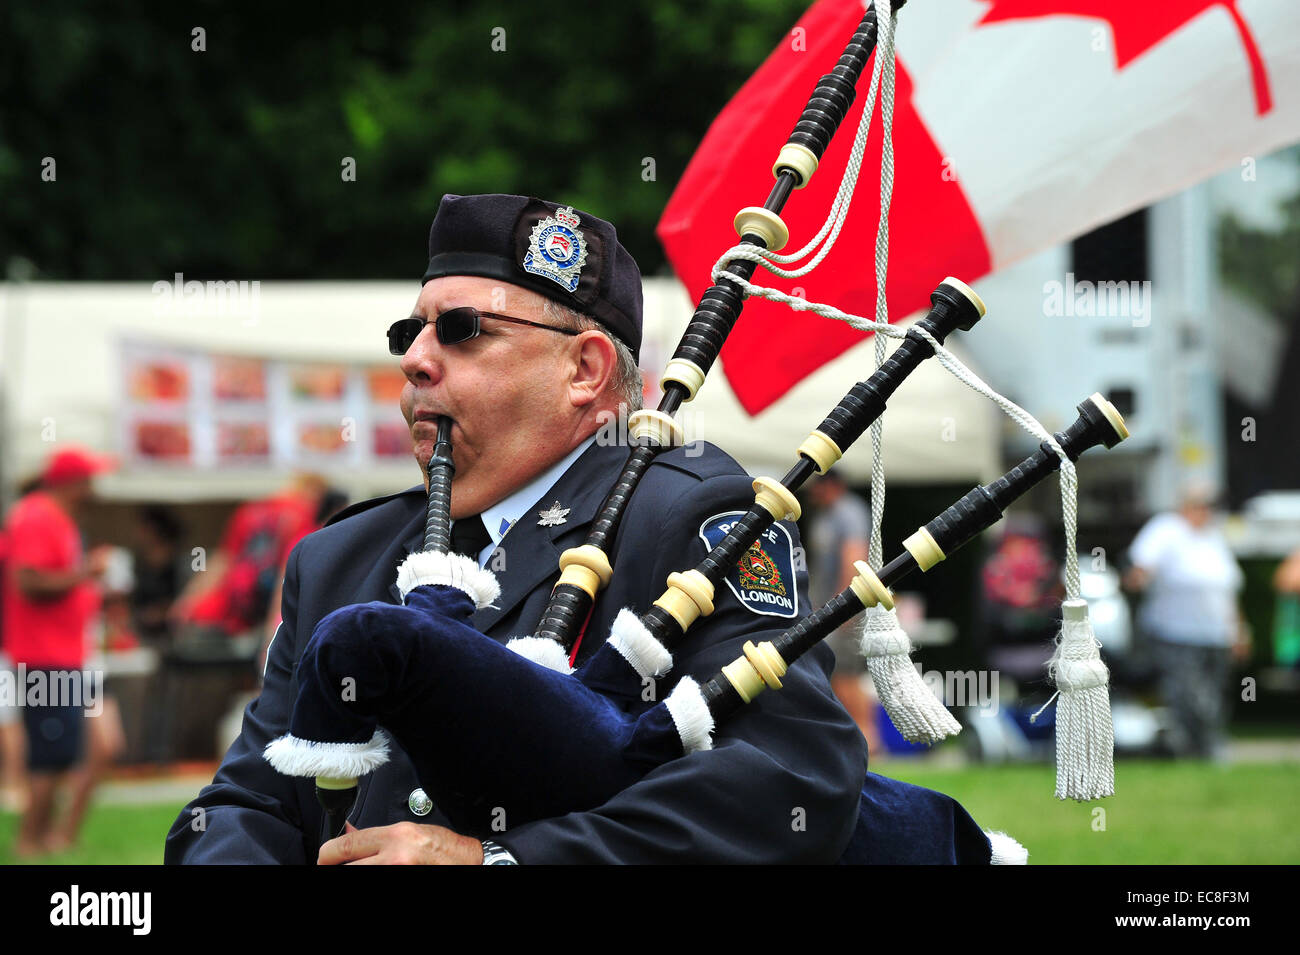 An Ontario police bagpiper plays the bagpipes during Canada Day  celebrations Stock Photo - Alamy